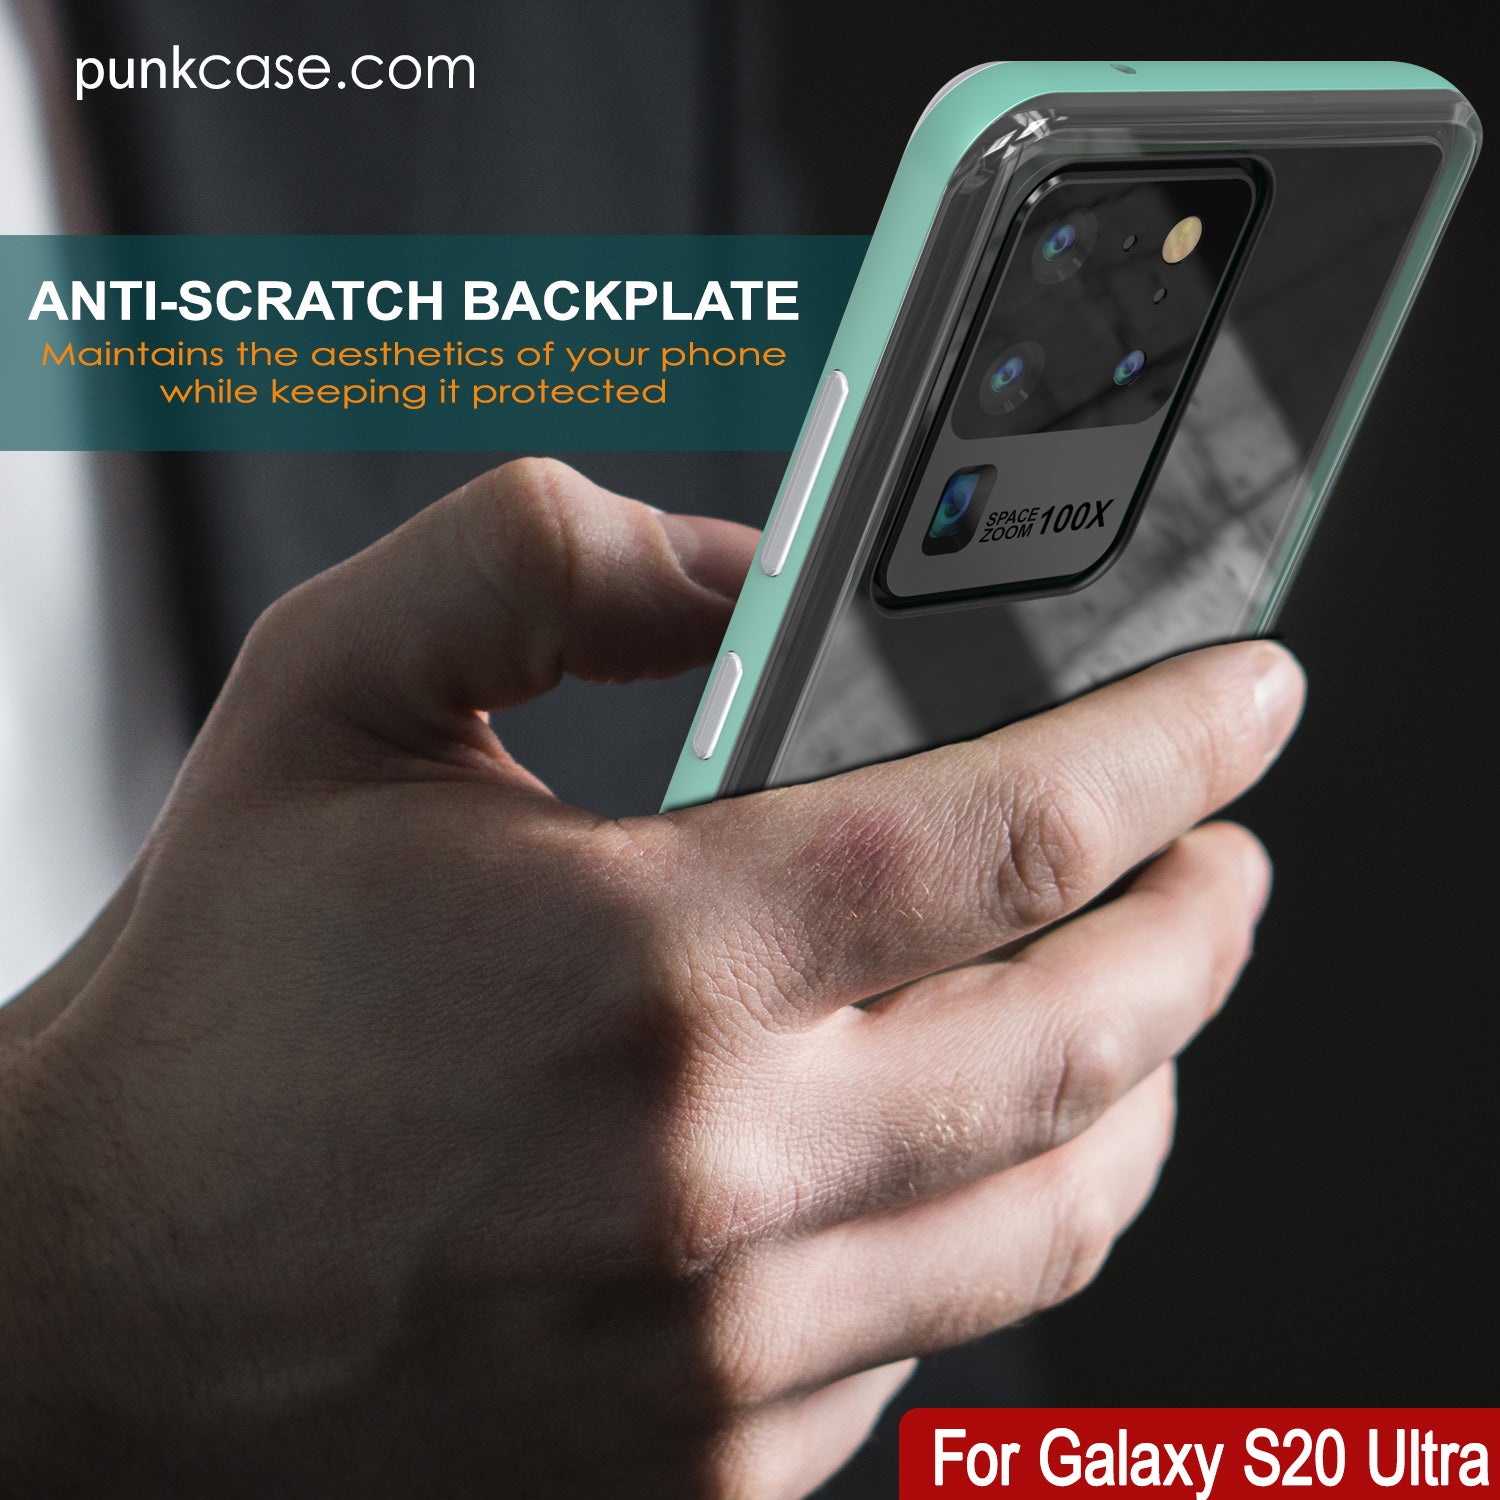 Galaxy S20 Ultra Case, PUNKcase [LUCID 3.0 Series] [Slim Fit] Armor Cover w/ Integrated Screen Protector [Teal]